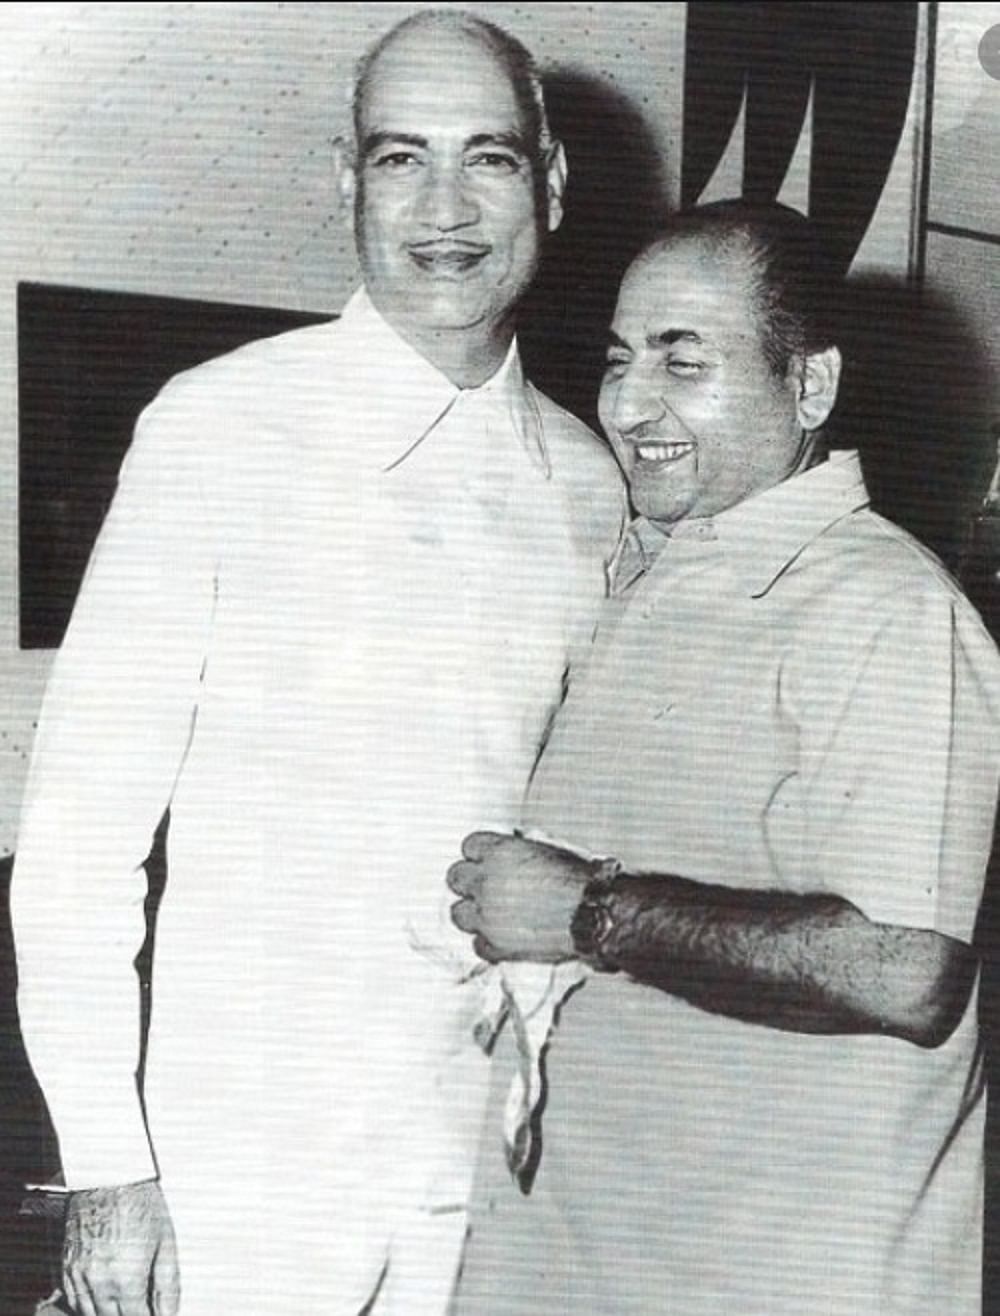 He enjoyed a personal rapport withMohammad Rafi. Credit: www.mohdrafi.com